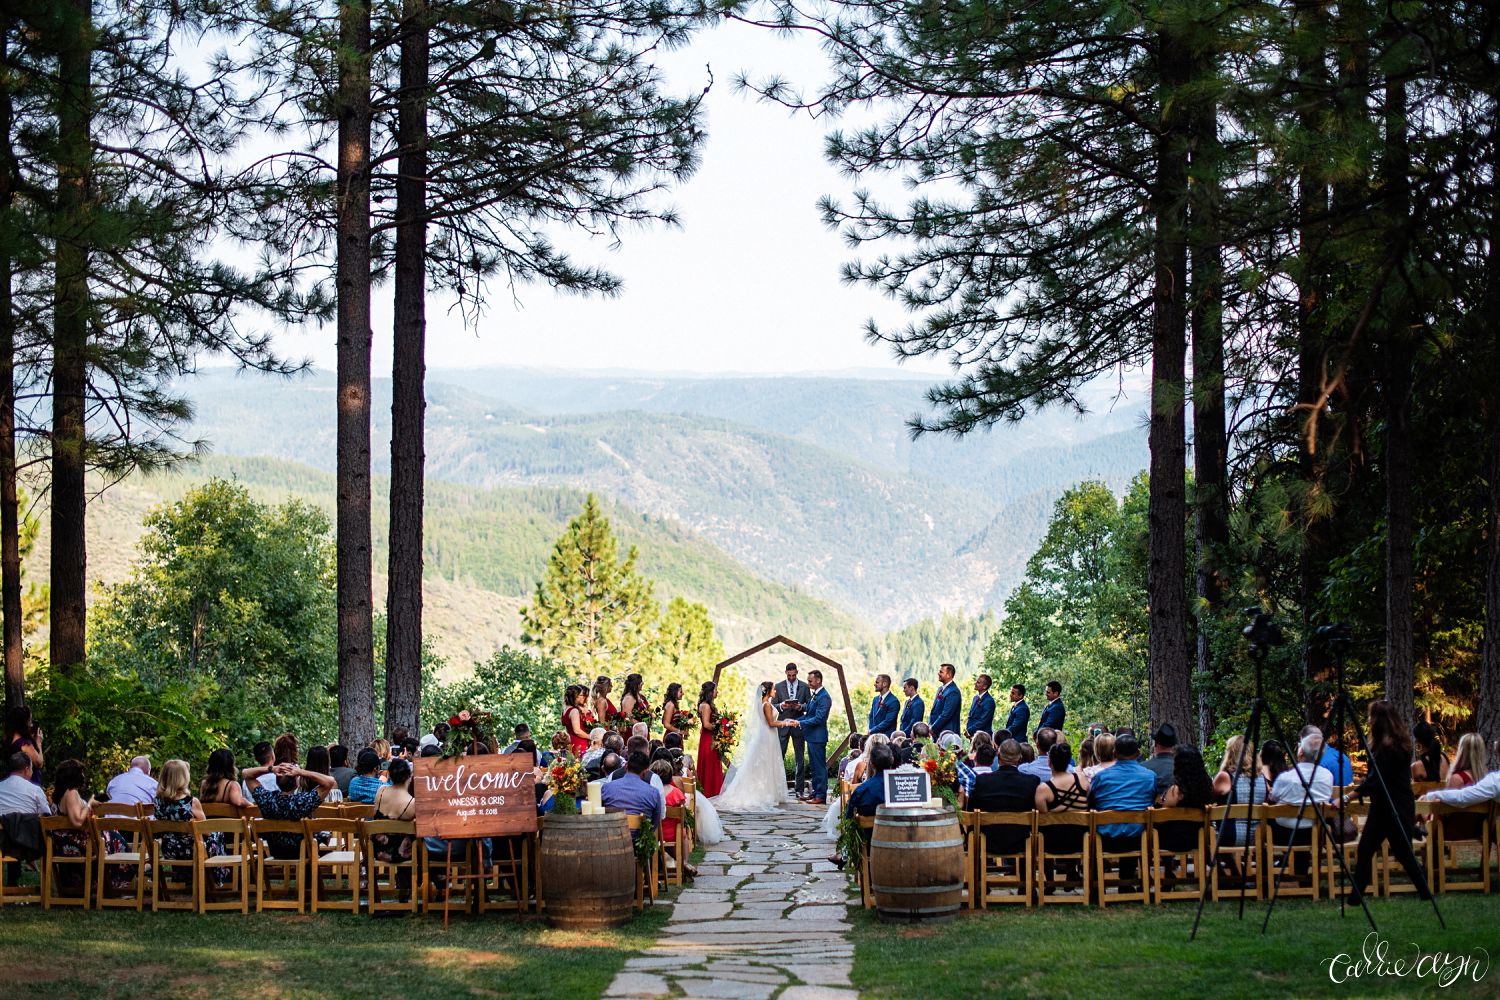 Forest House Lodge Wedding